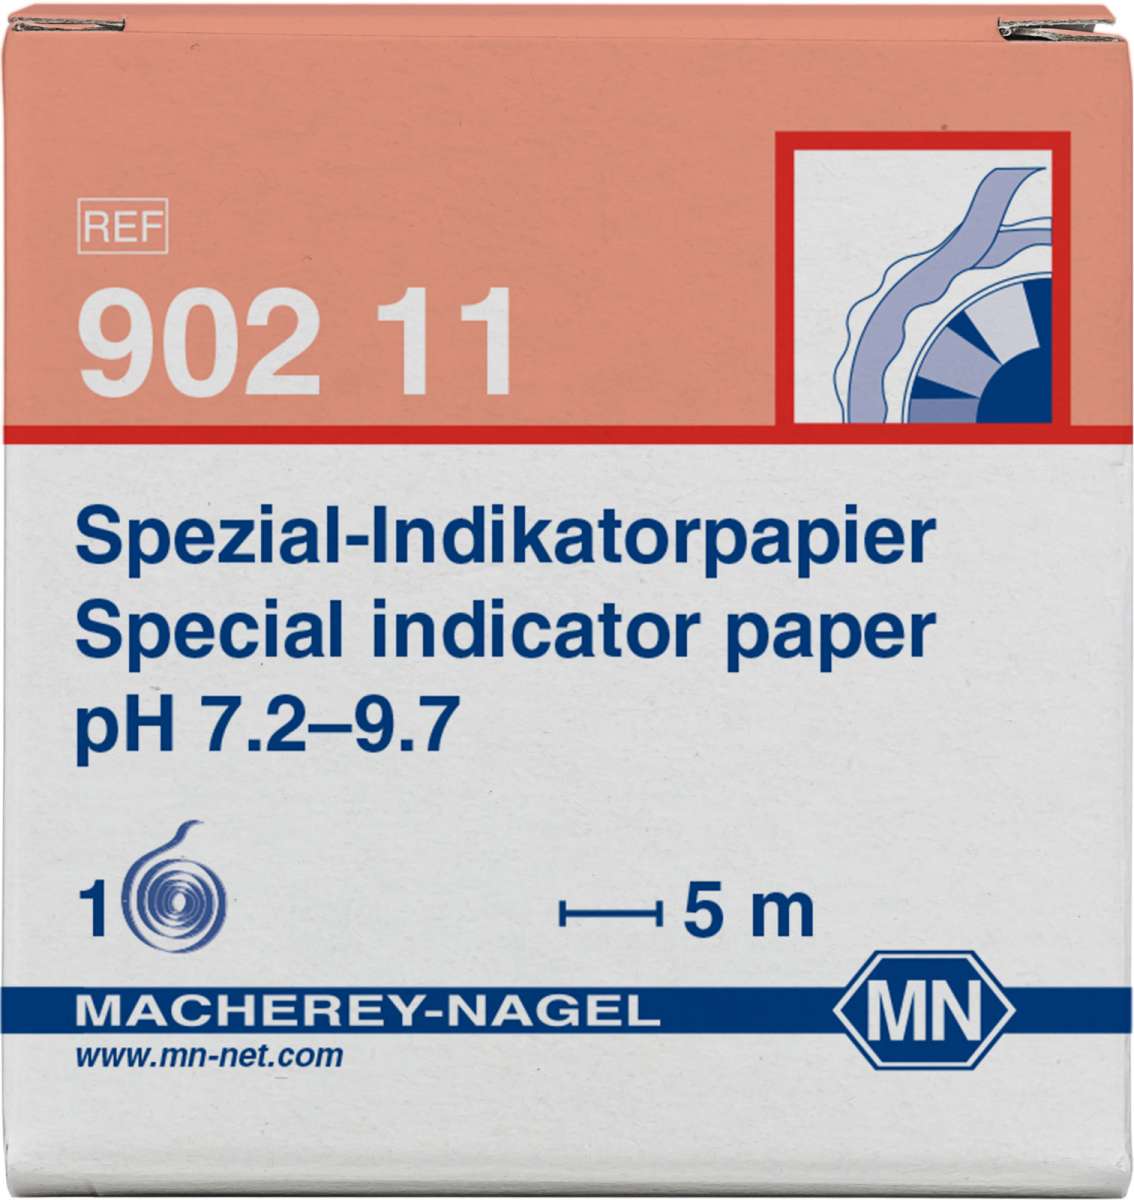 Refill pack for Special indicator paper pH 7.2 to 9.7 (3 reels of 5m length and 7mm width)